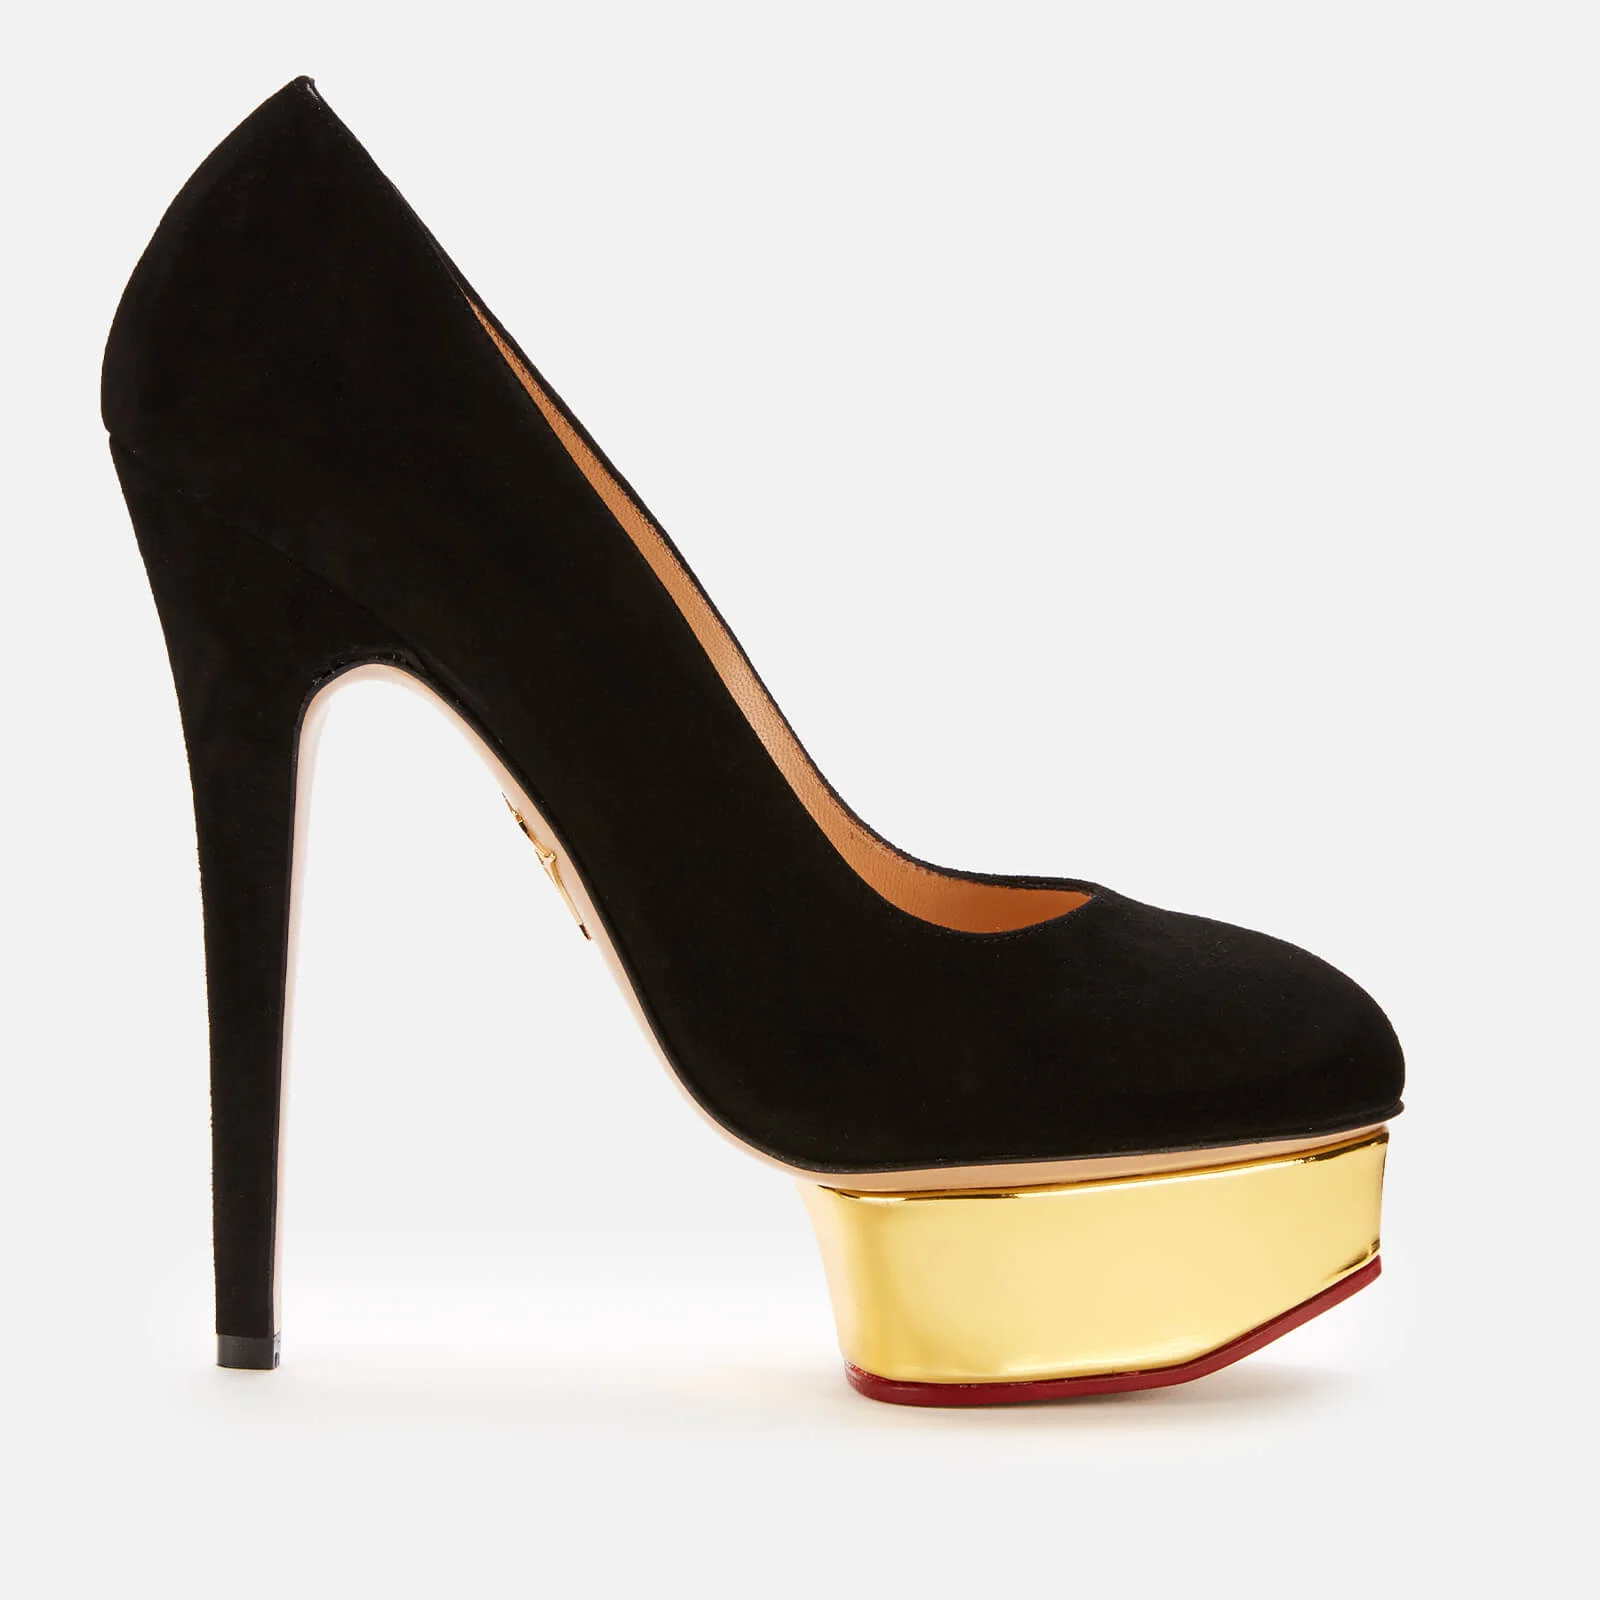 Charlotte Olympia Women's Dolly Suede Platform Court Shoes - Black Image 1